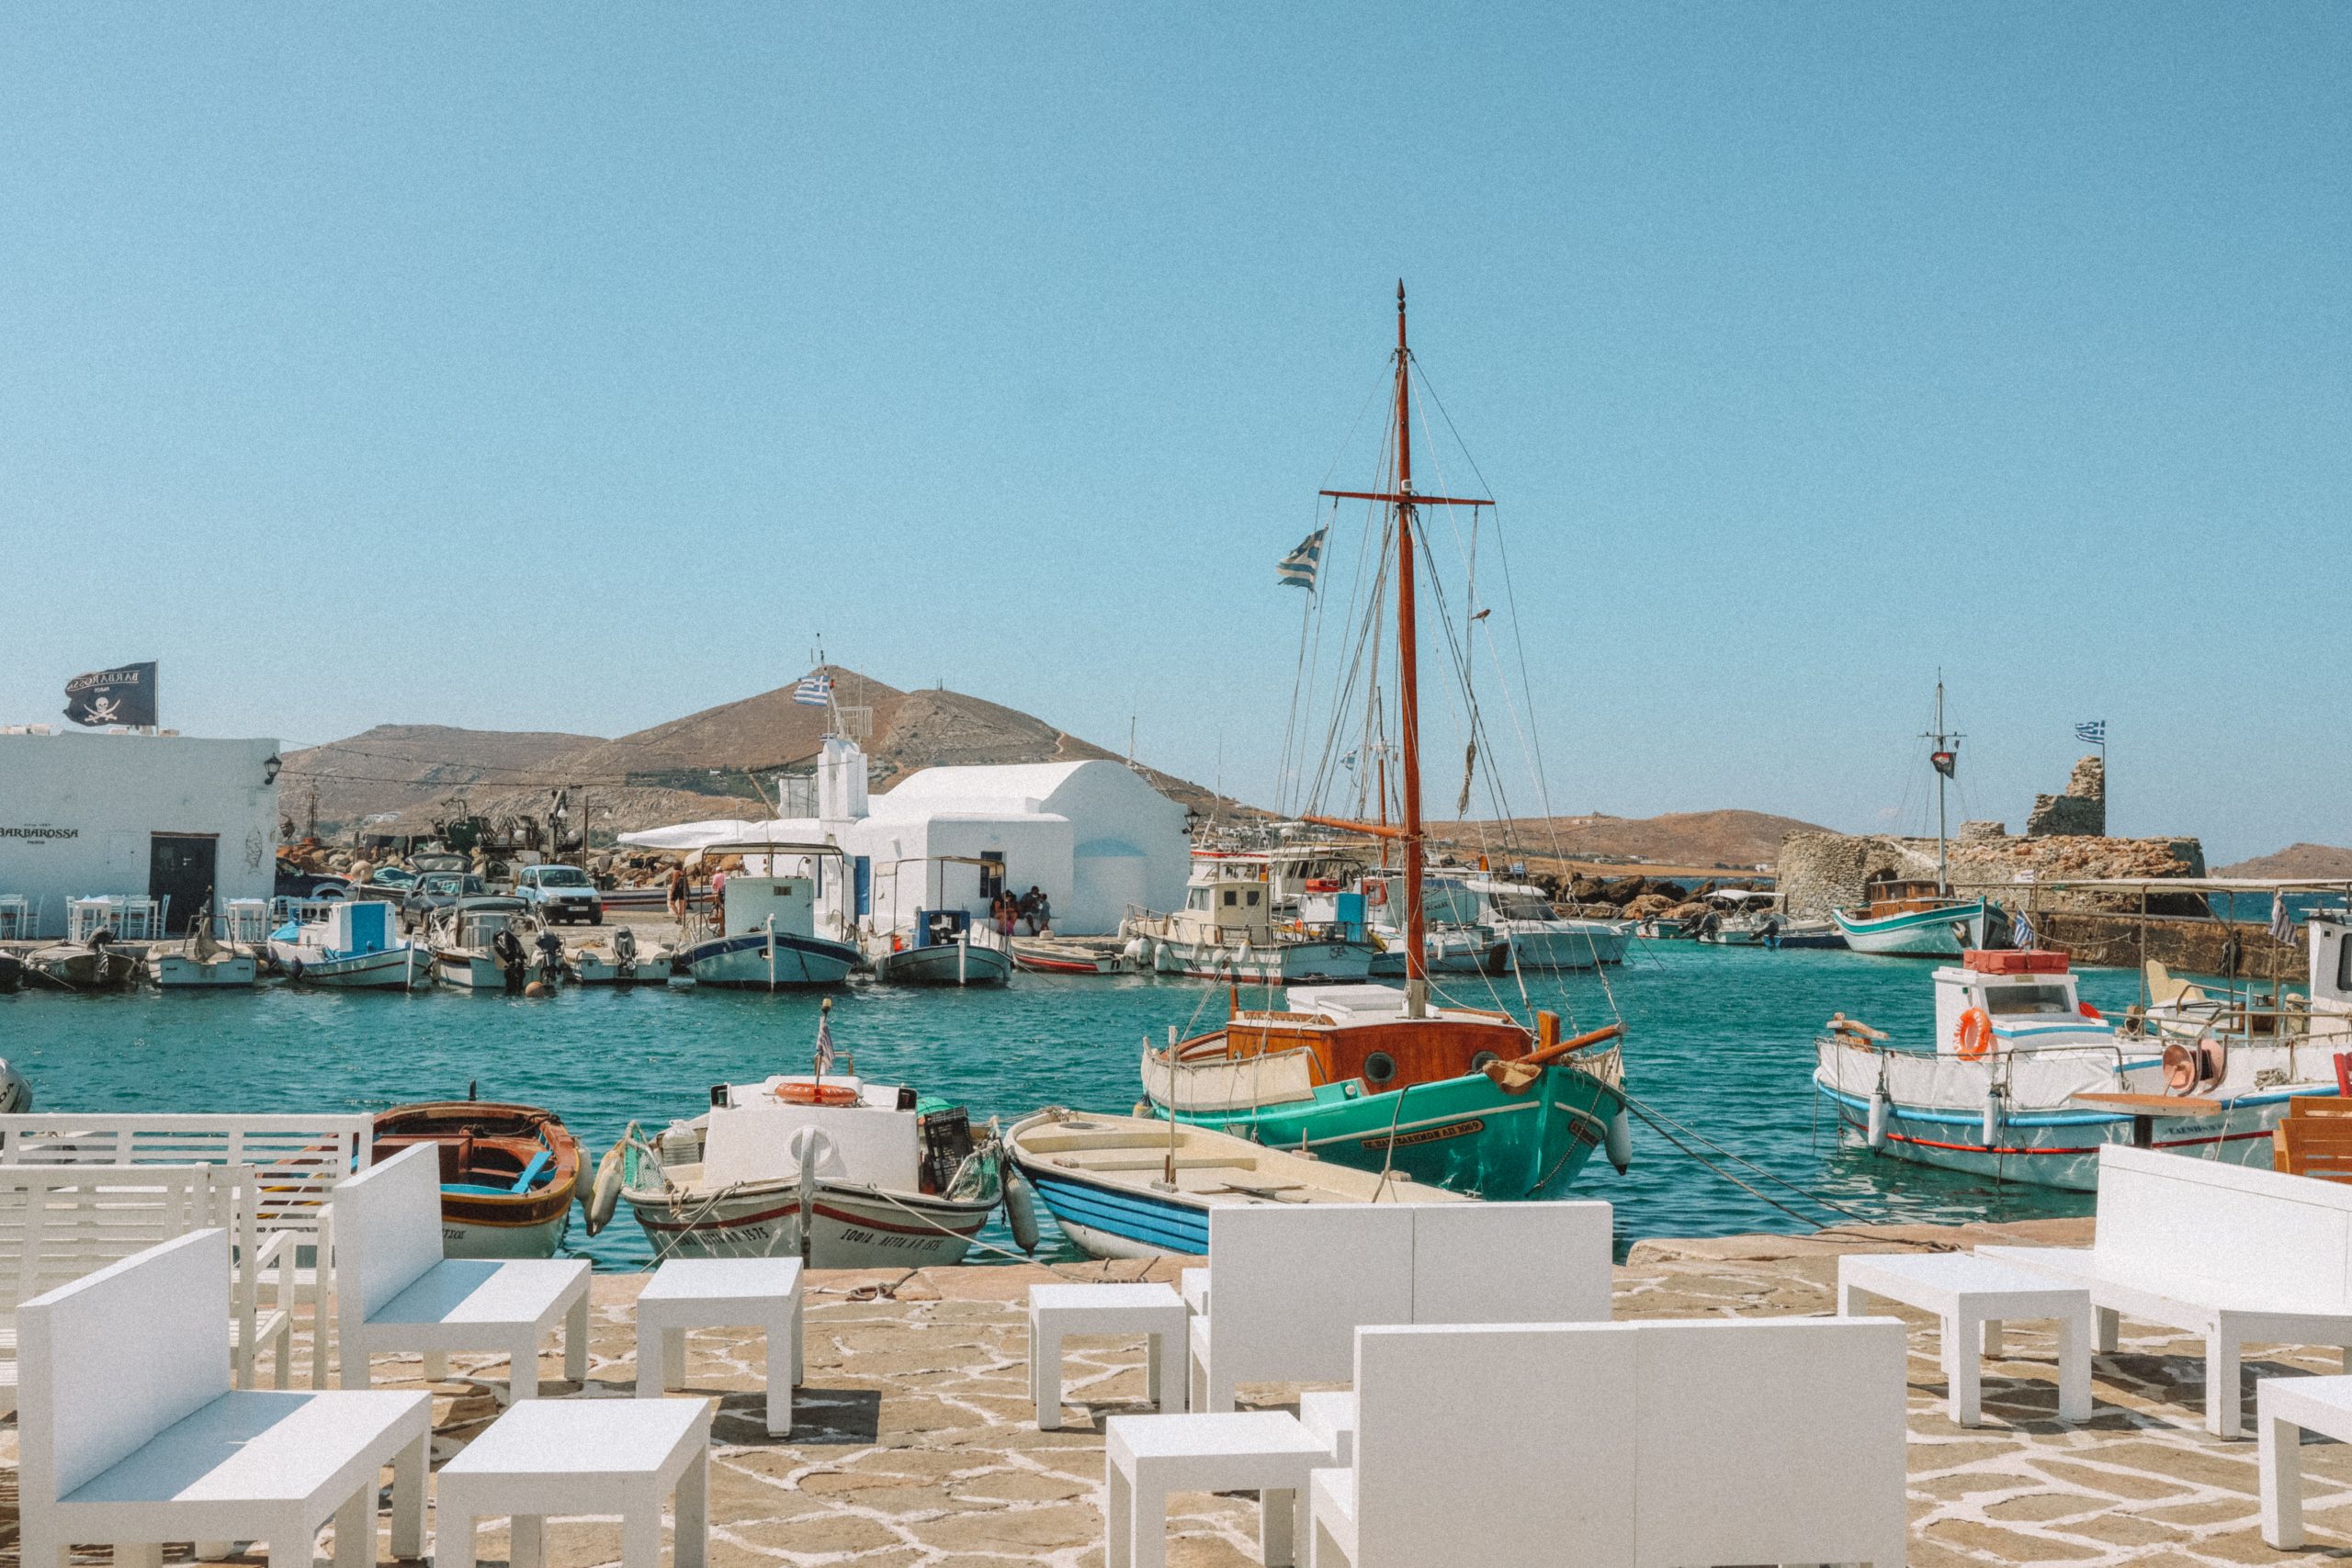 Docked boats in turquoise water at the Naoussa harbour. Things to do in Paros